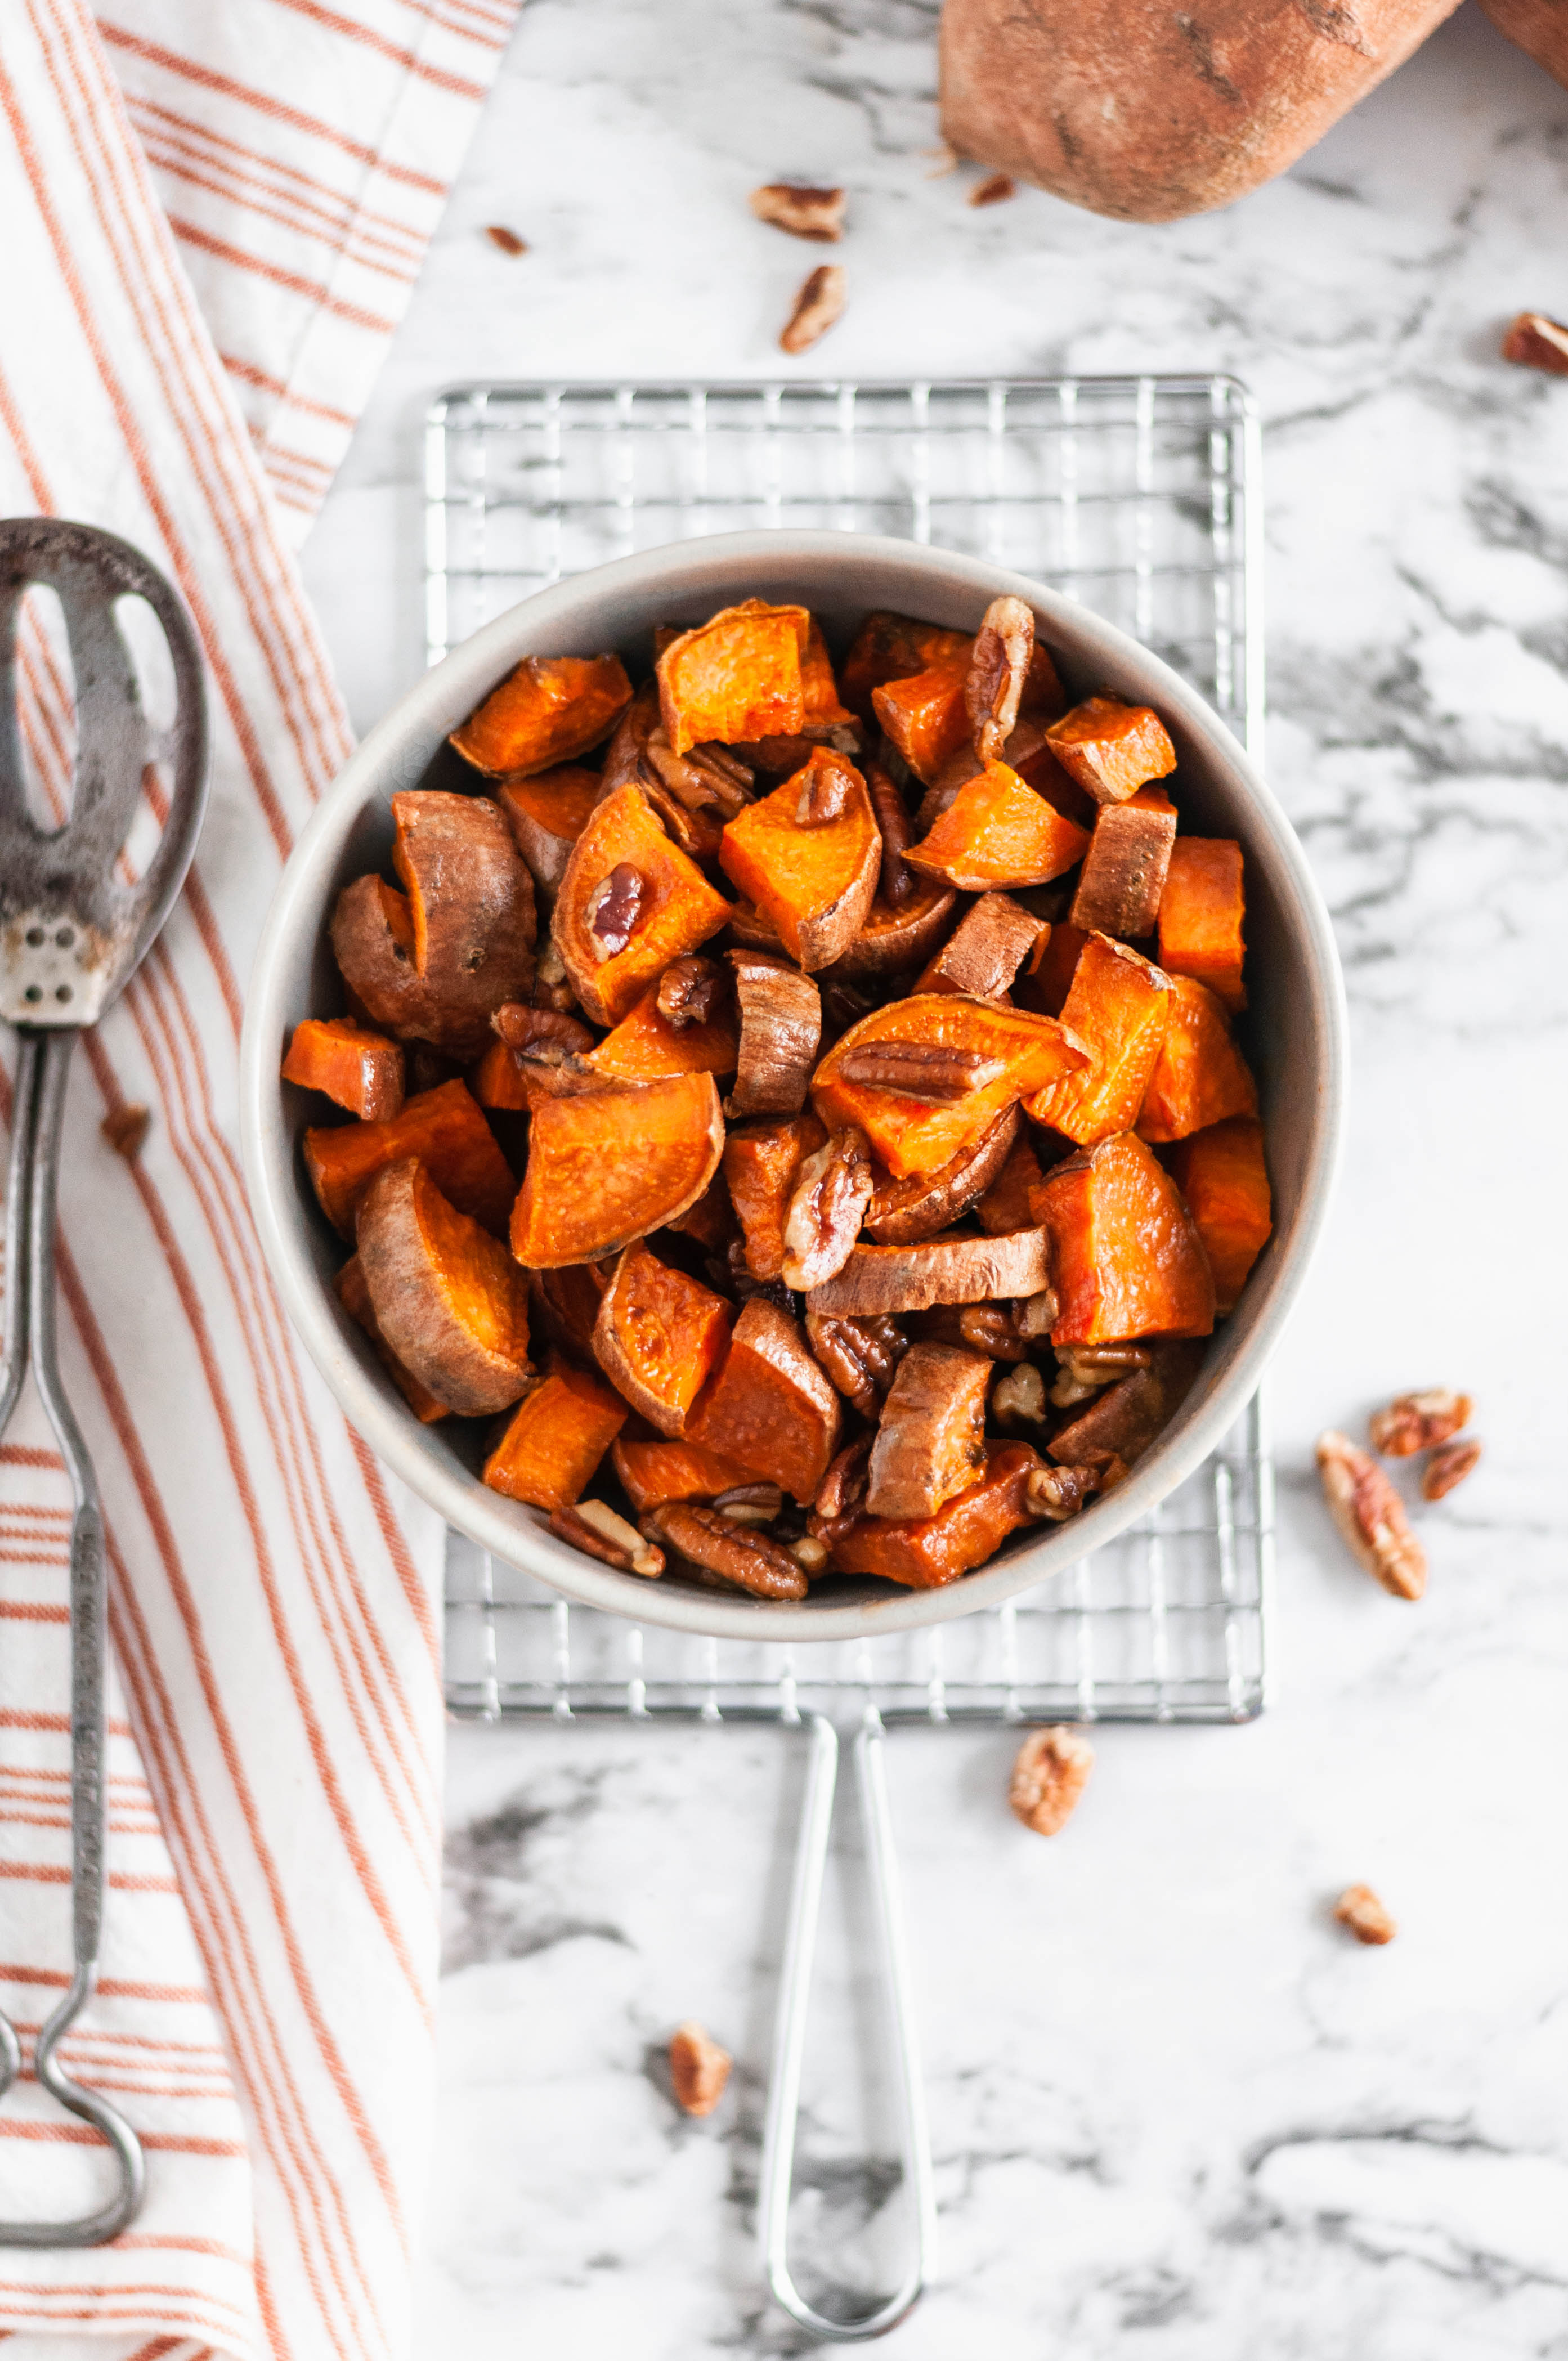 These Roasted Sweet Potatoes with buttery pecans are the perfect simple and easy side dish to add to your holiday menu. Less than 40 minutes from start to finish and you'll have sweet, tender, crunchy, buttery goodness on your dinner table.